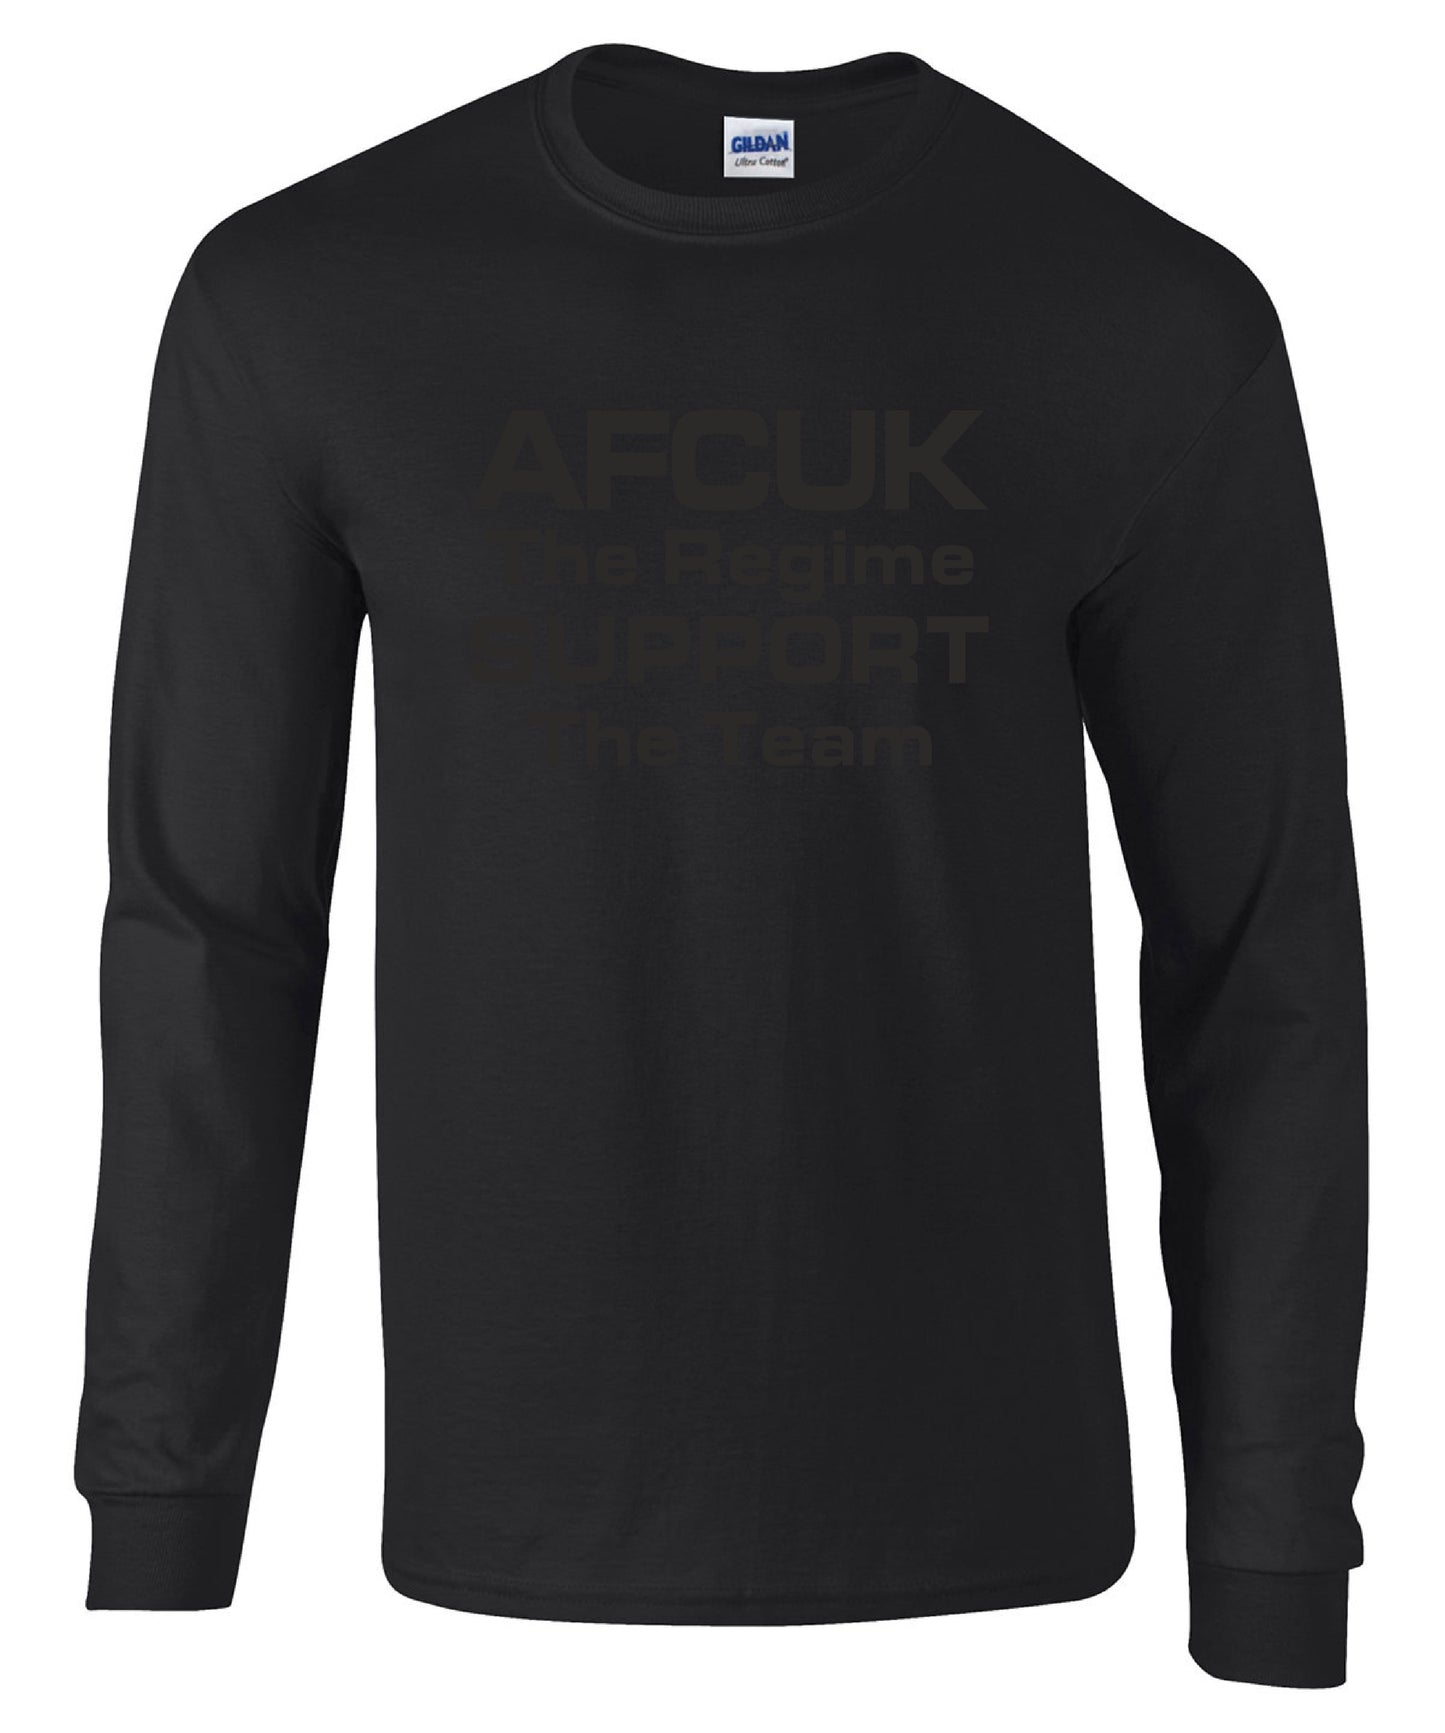 AFCUK The Regime - Long Sleeve T-shirts